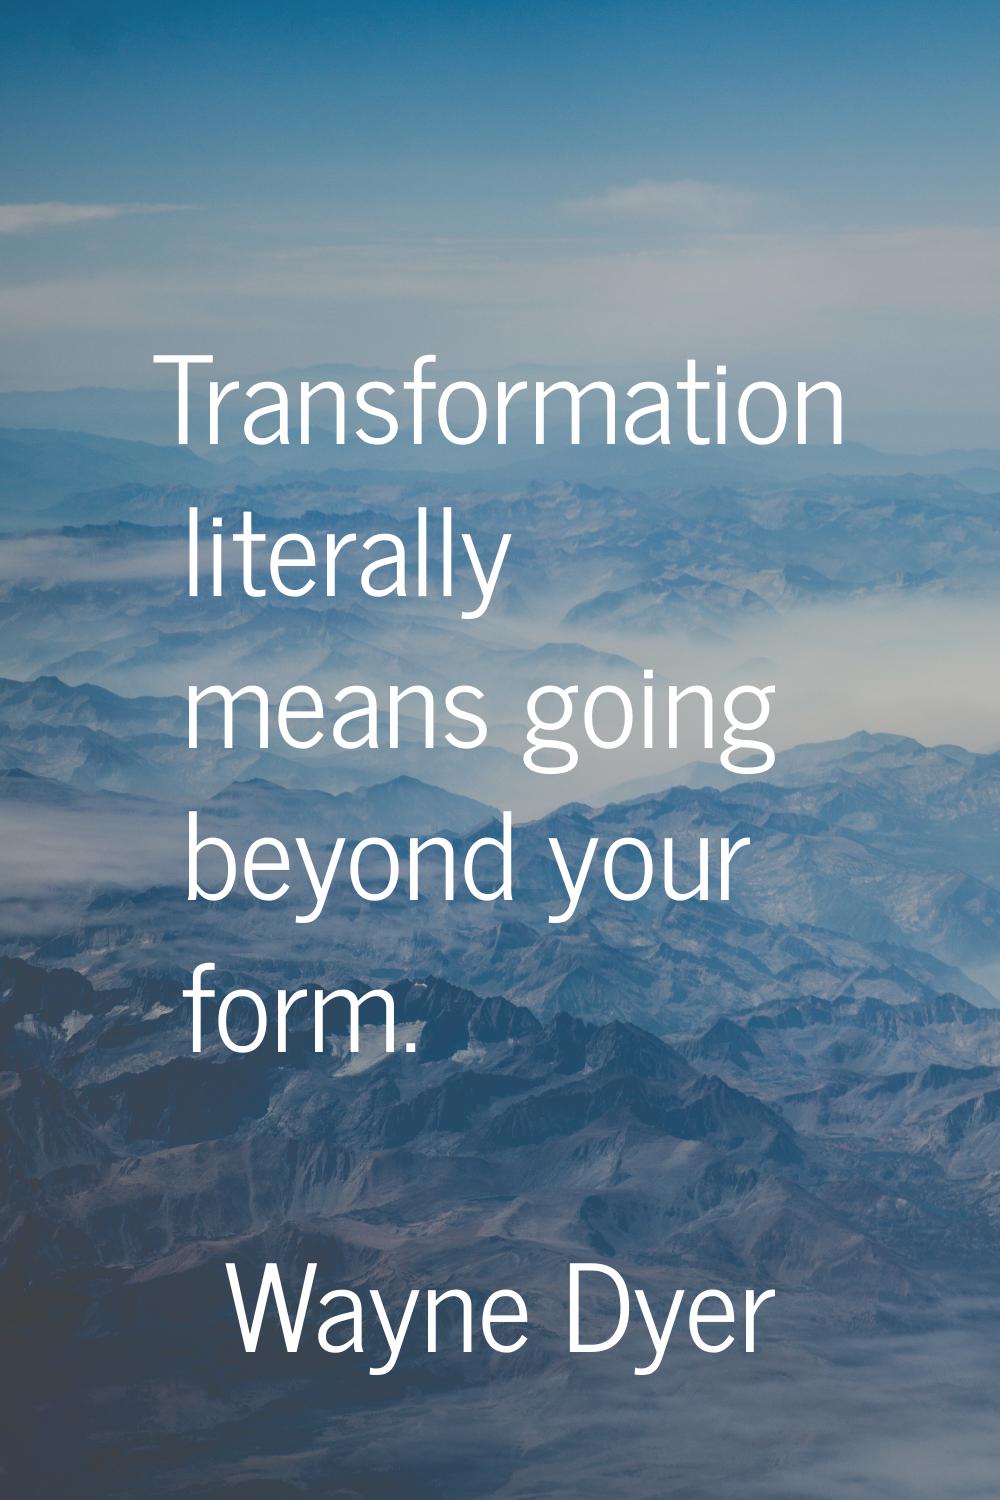 Transformation literally means going beyond your form.